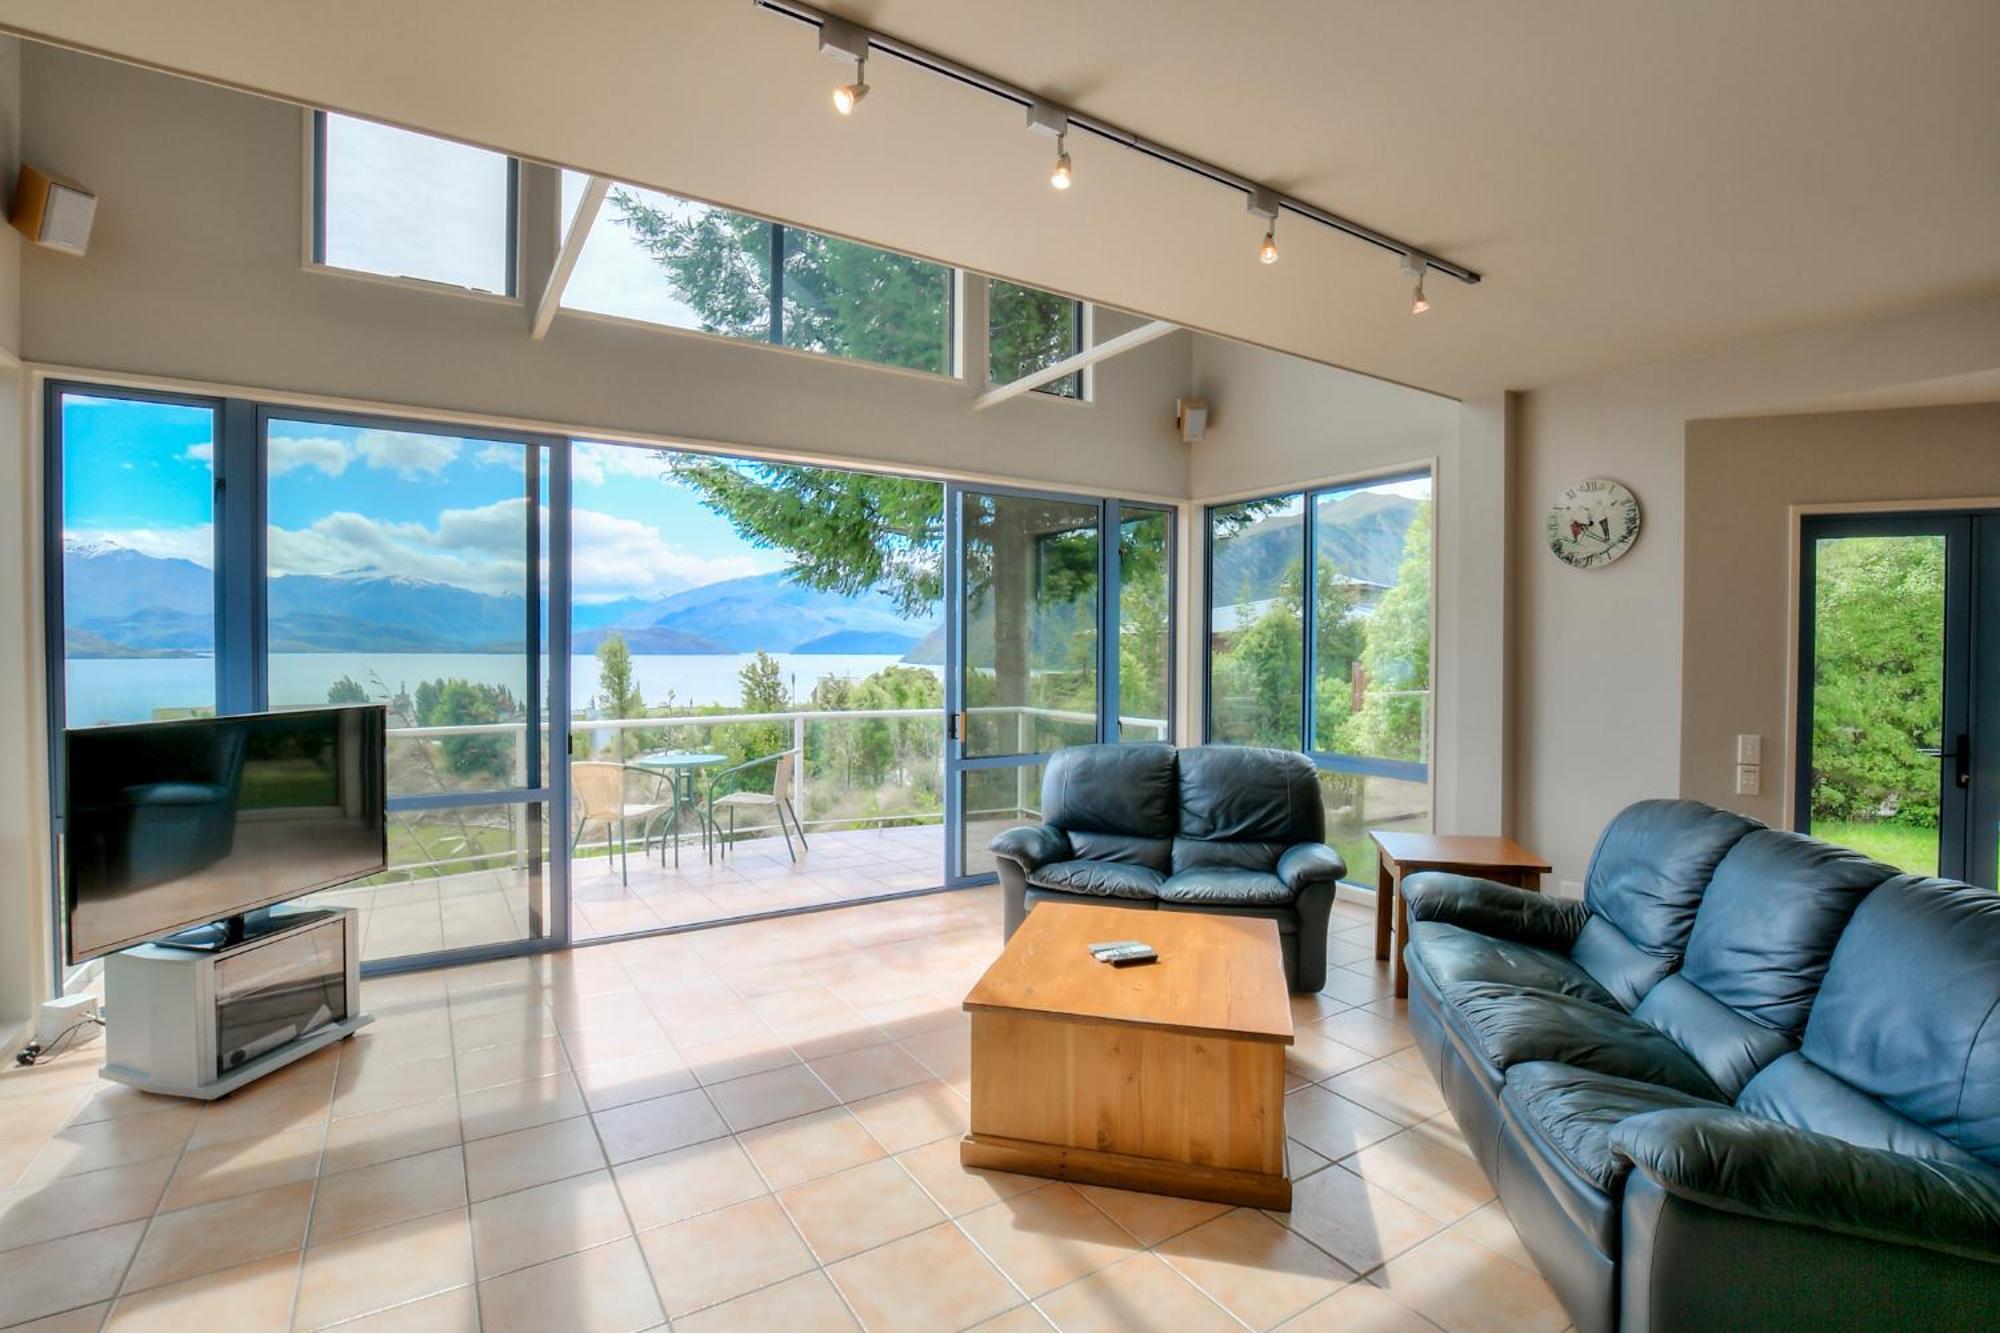 Tawhiri - Tranquility, Space And Stunning Views In Paradise 瓦纳卡 外观 照片